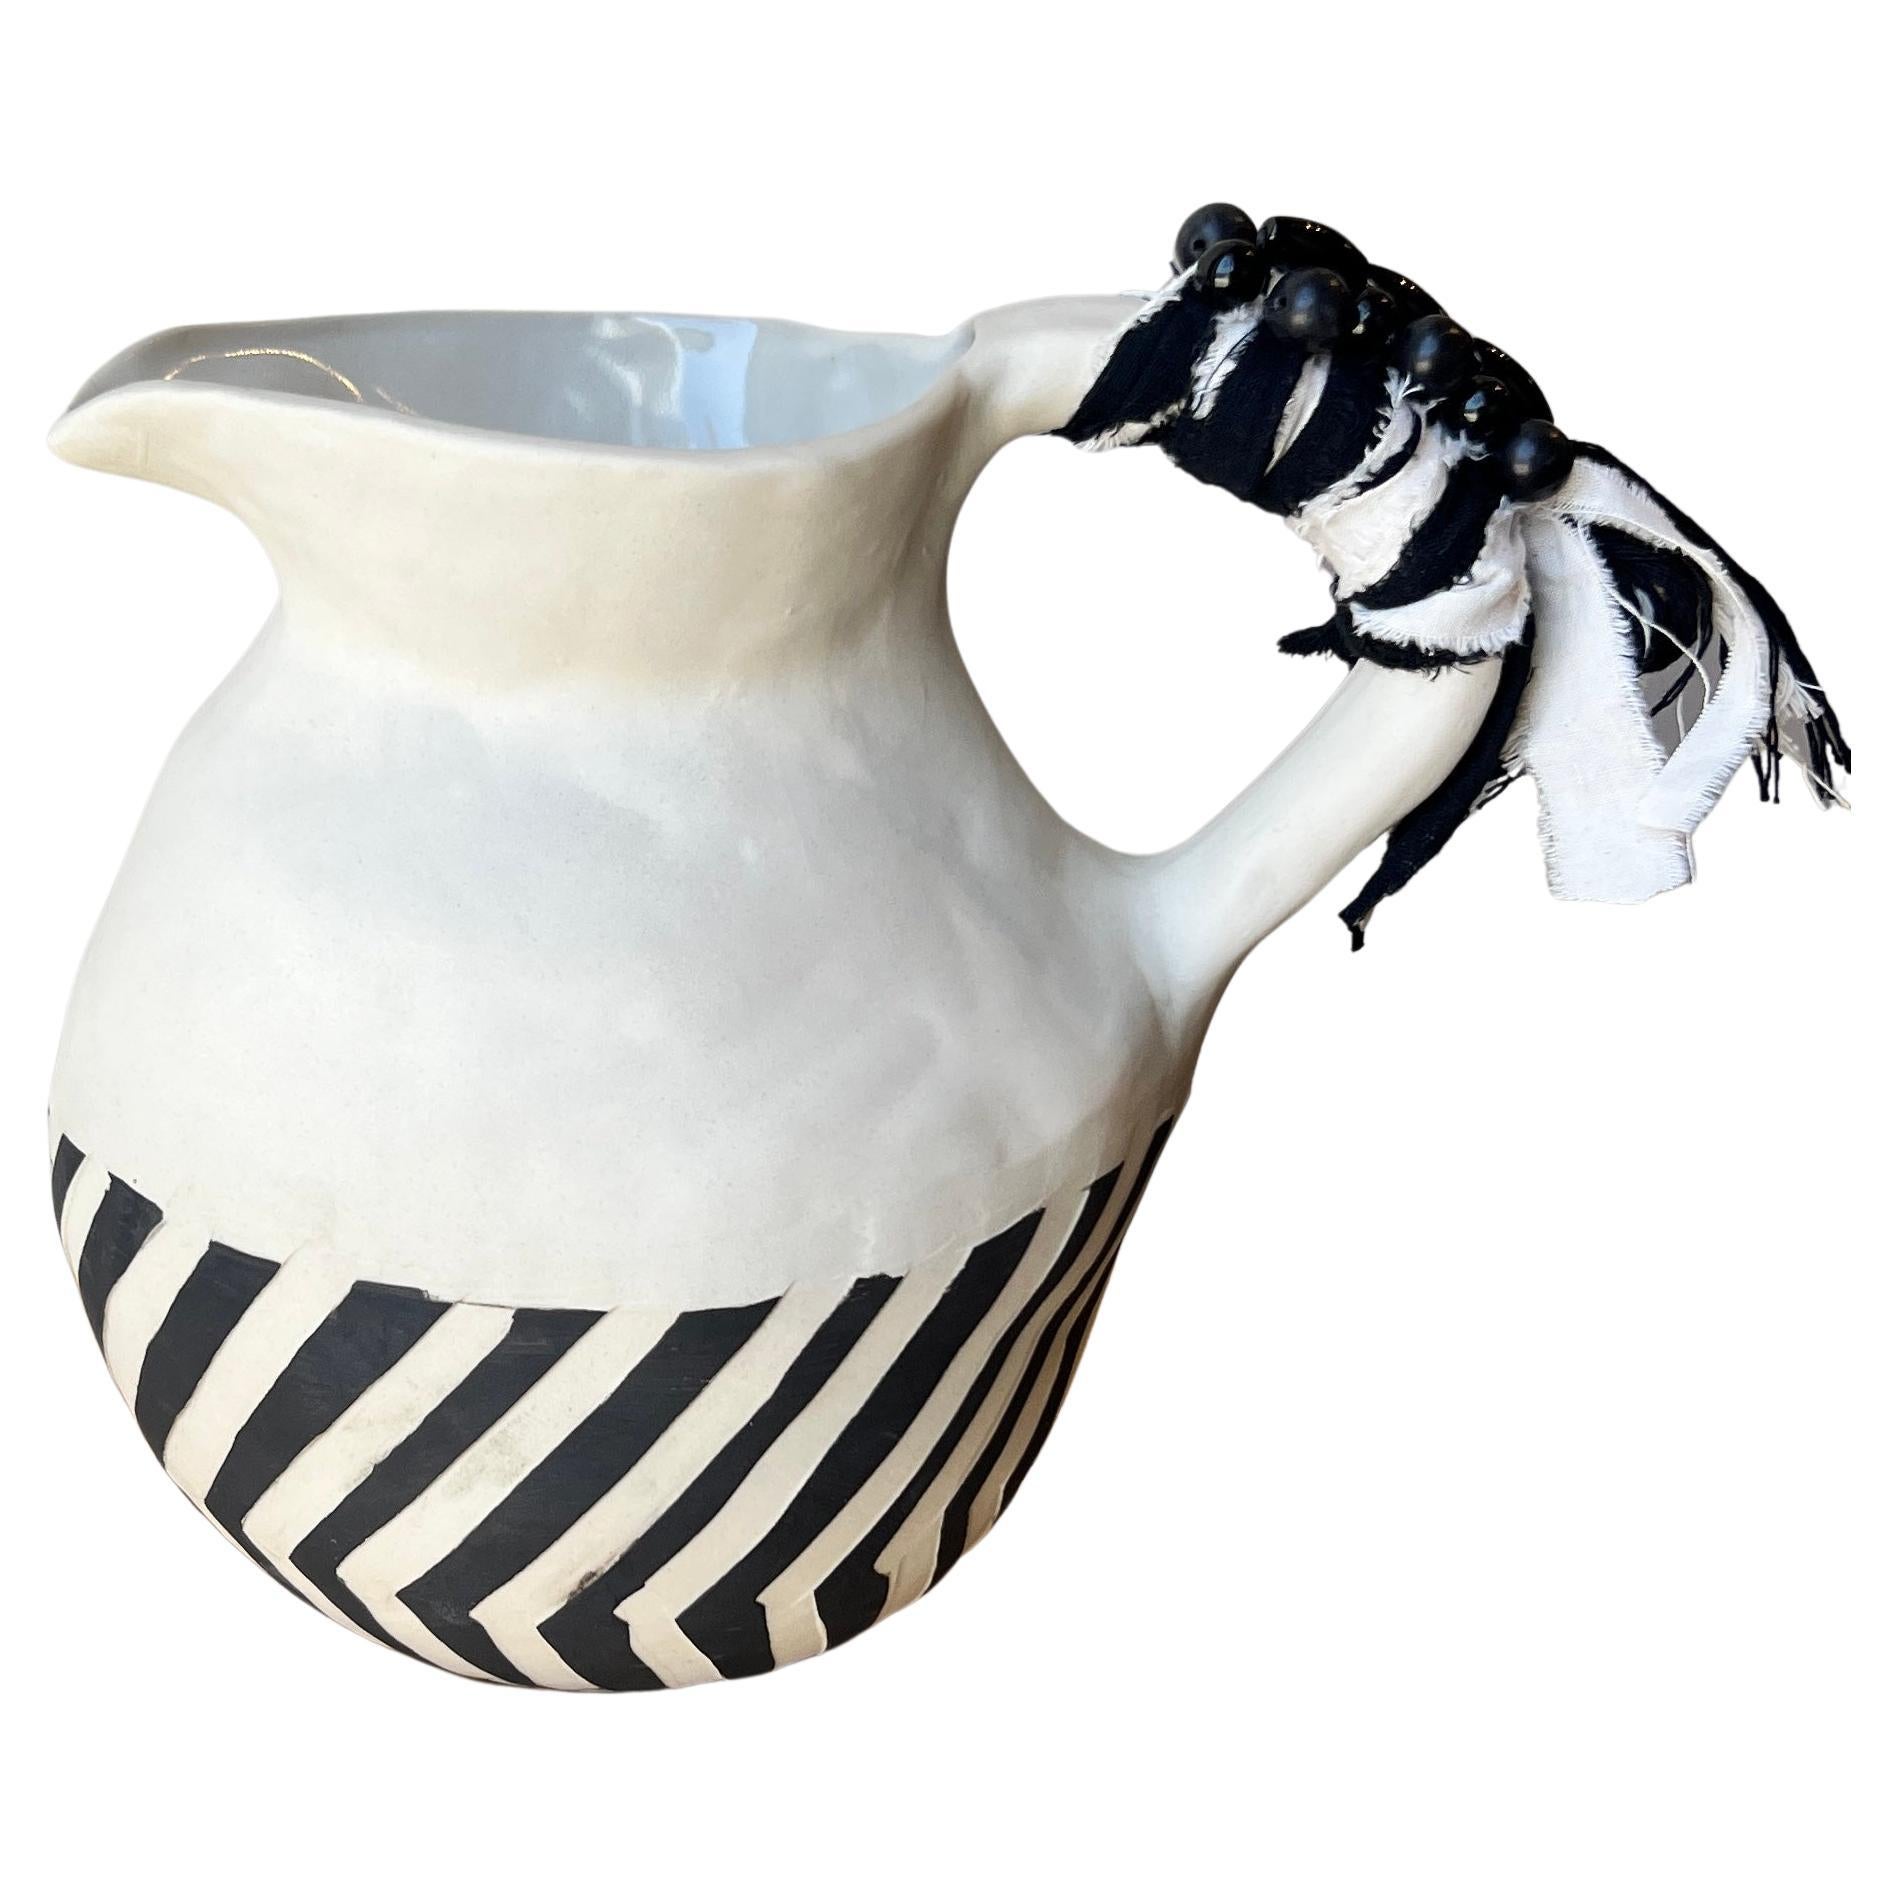 Striped Whimsical Handmade Ceramic Jug in Black and White with Fabric and Beads For Sale